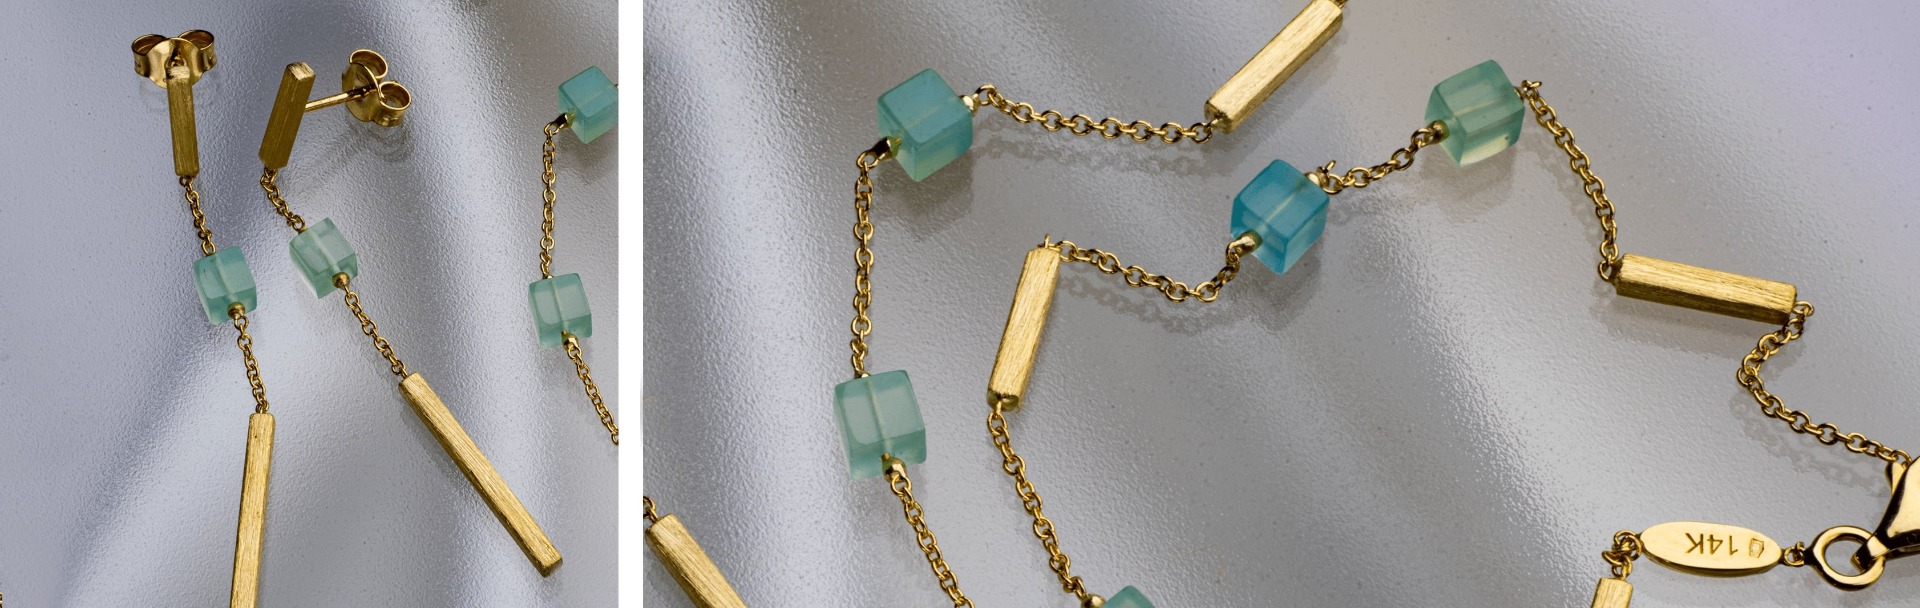 14K Gold and Chalcedony Jewelry